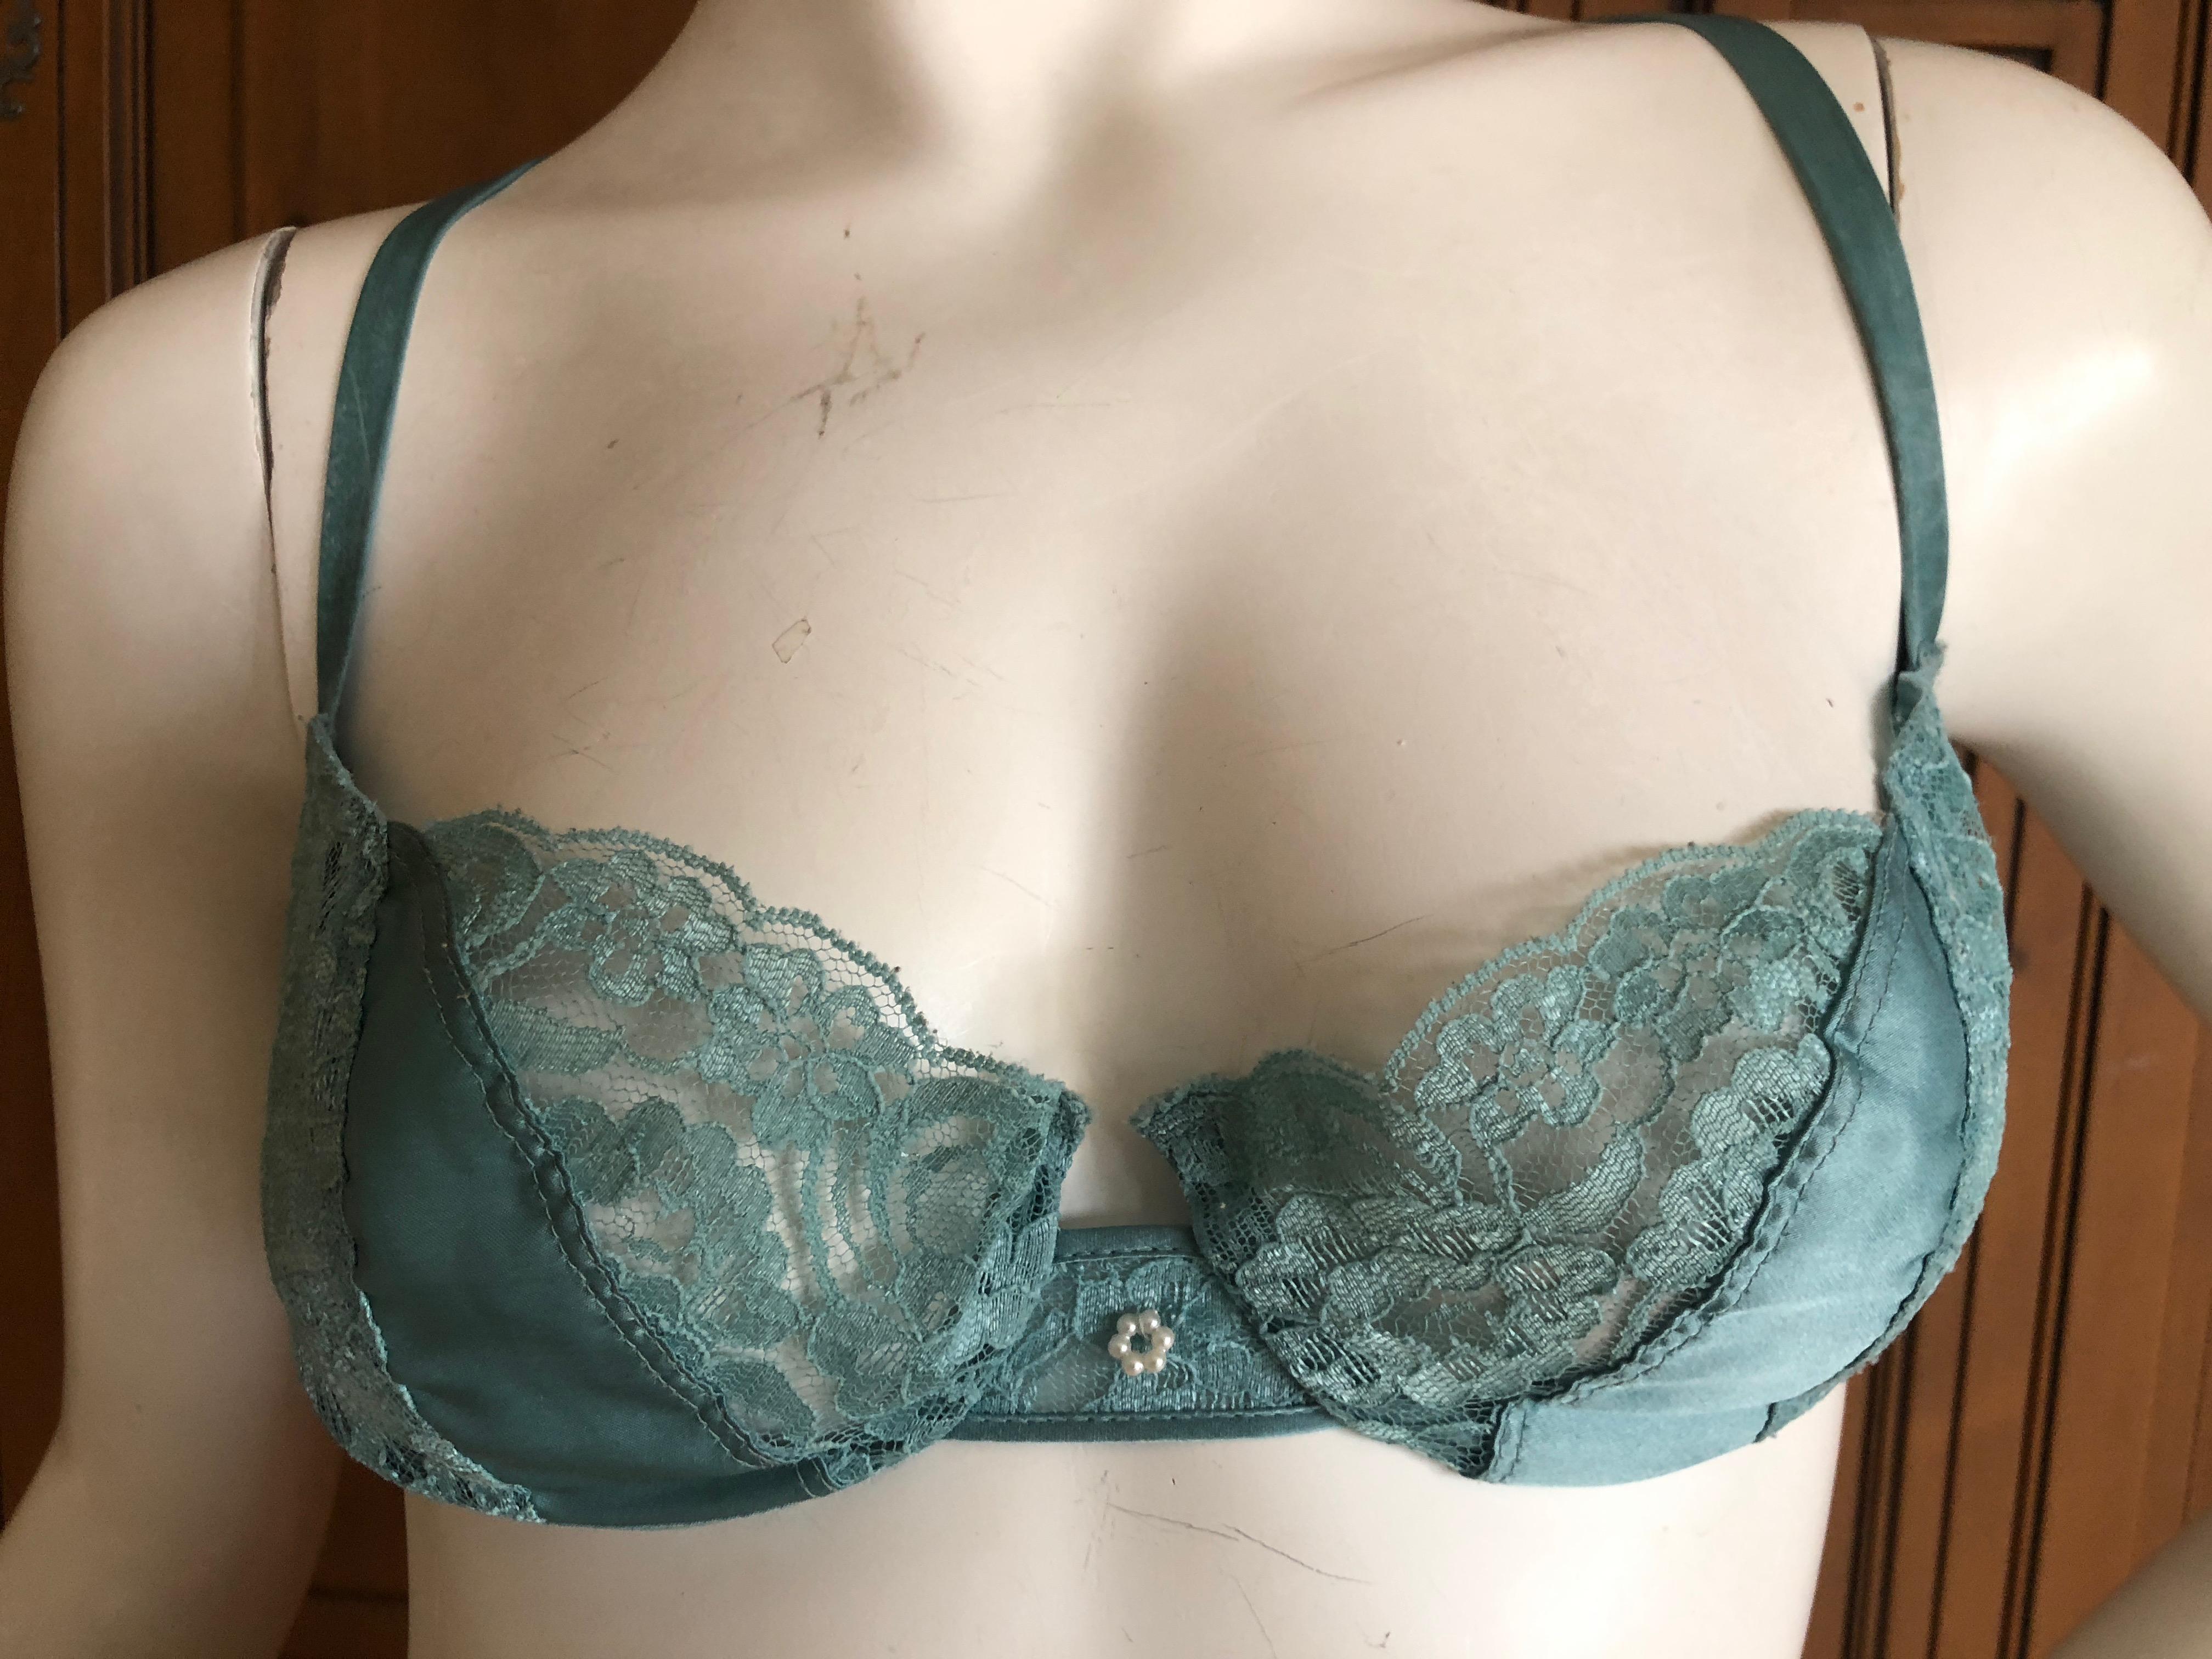 Christian Dior by Galliano Vintage Intimates Lace Trim Underwire Bra 34C Pearls In Excellent Condition For Sale In Cloverdale, CA